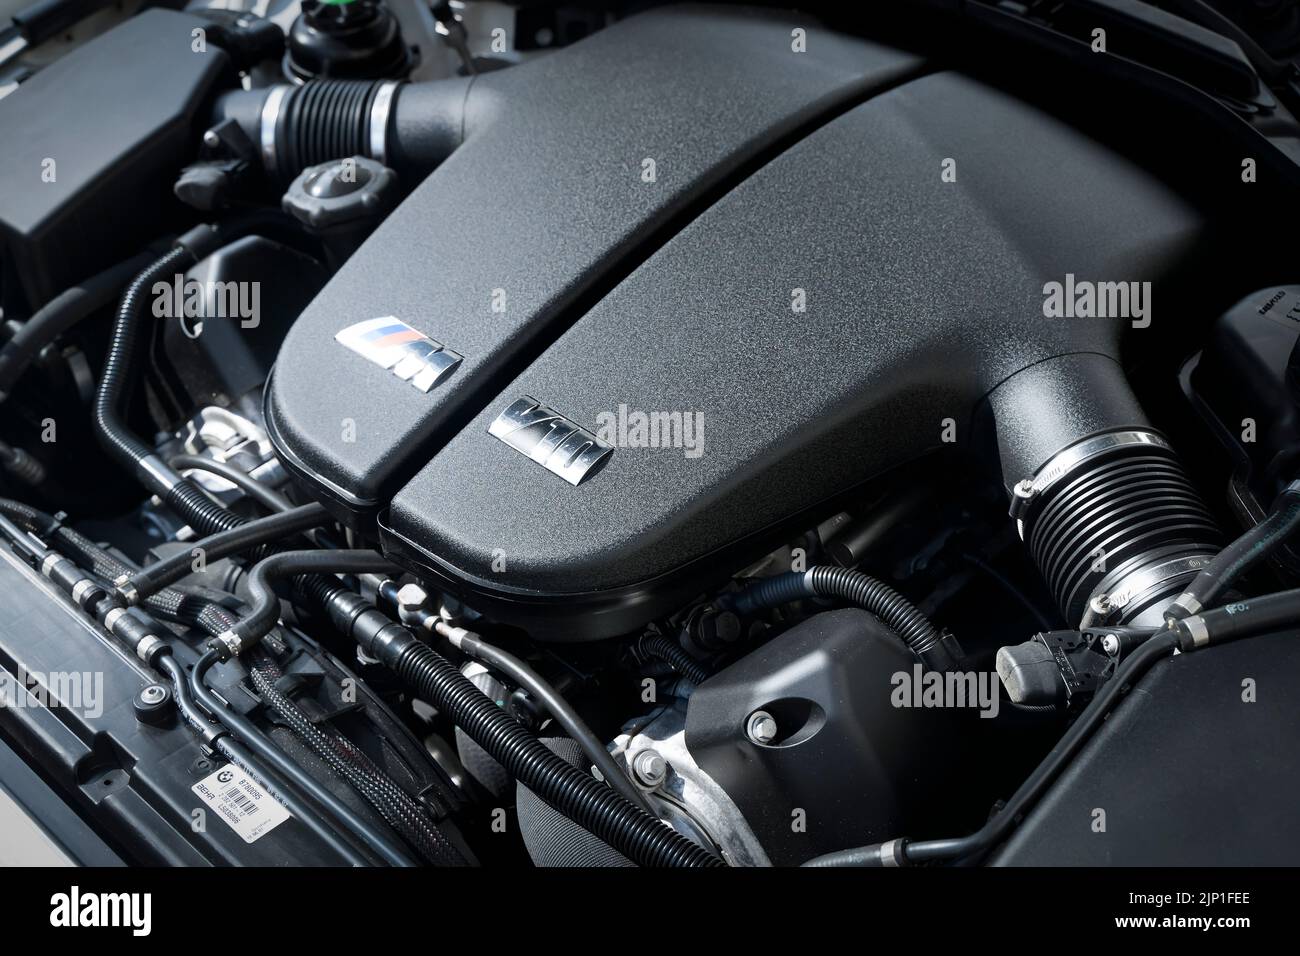 Berlin, Germany - August 14, 2022: BMW engine. Modern V10 engine in a German premium sports car. Automotive, motors, manufacturing concept. High quality photo Stock Photo